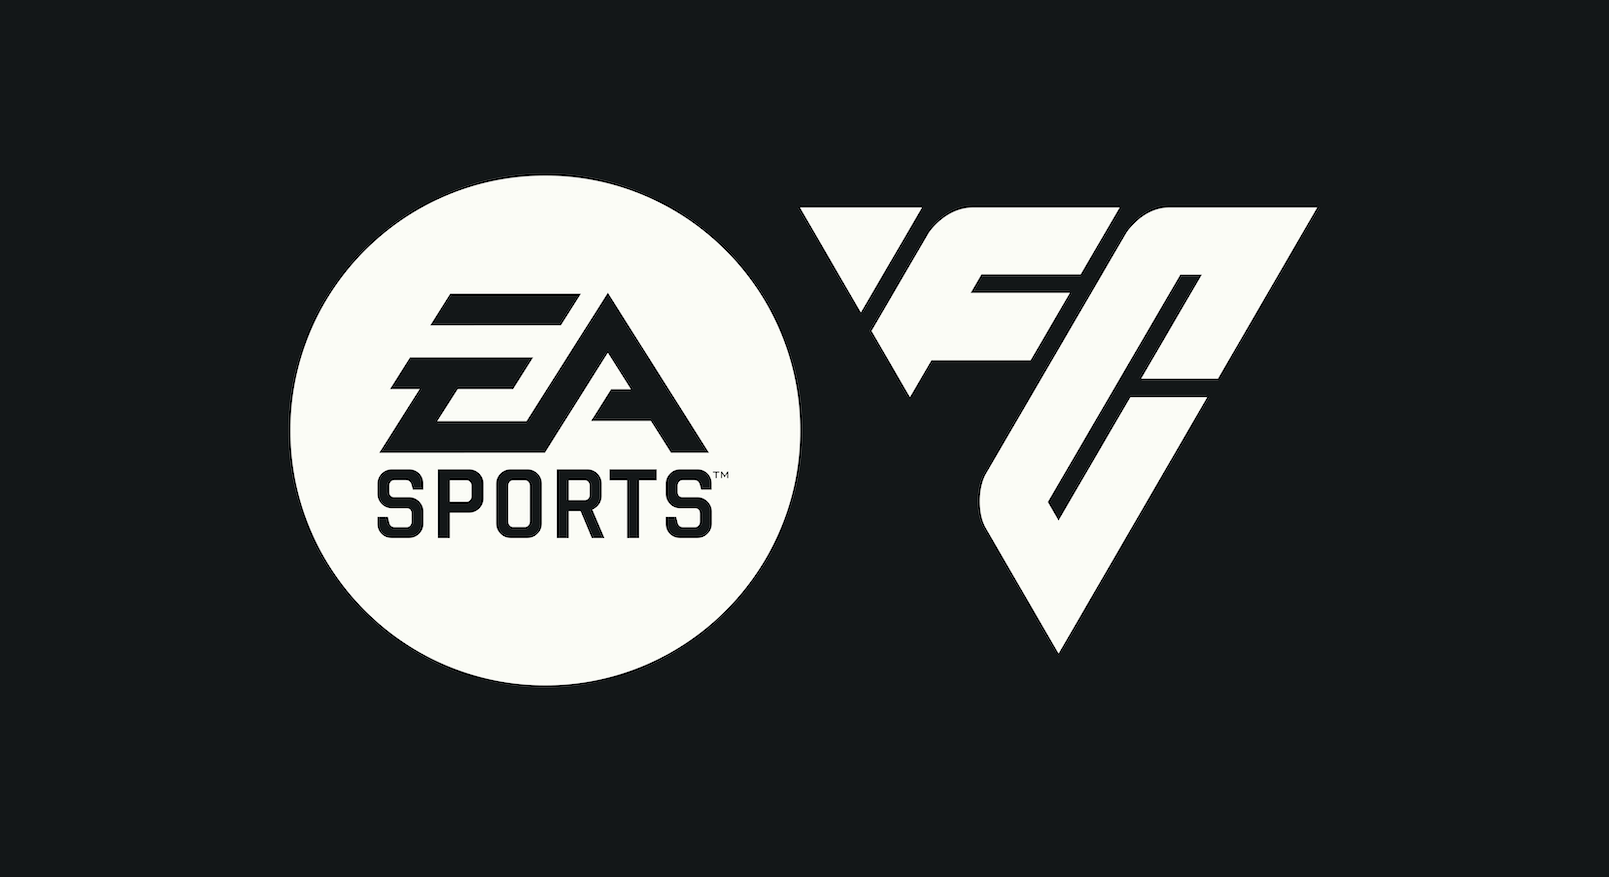 INTRODUCING EA SPORTS FC™, THE NEXT CHAPTER OF THE WORLD’S GAME